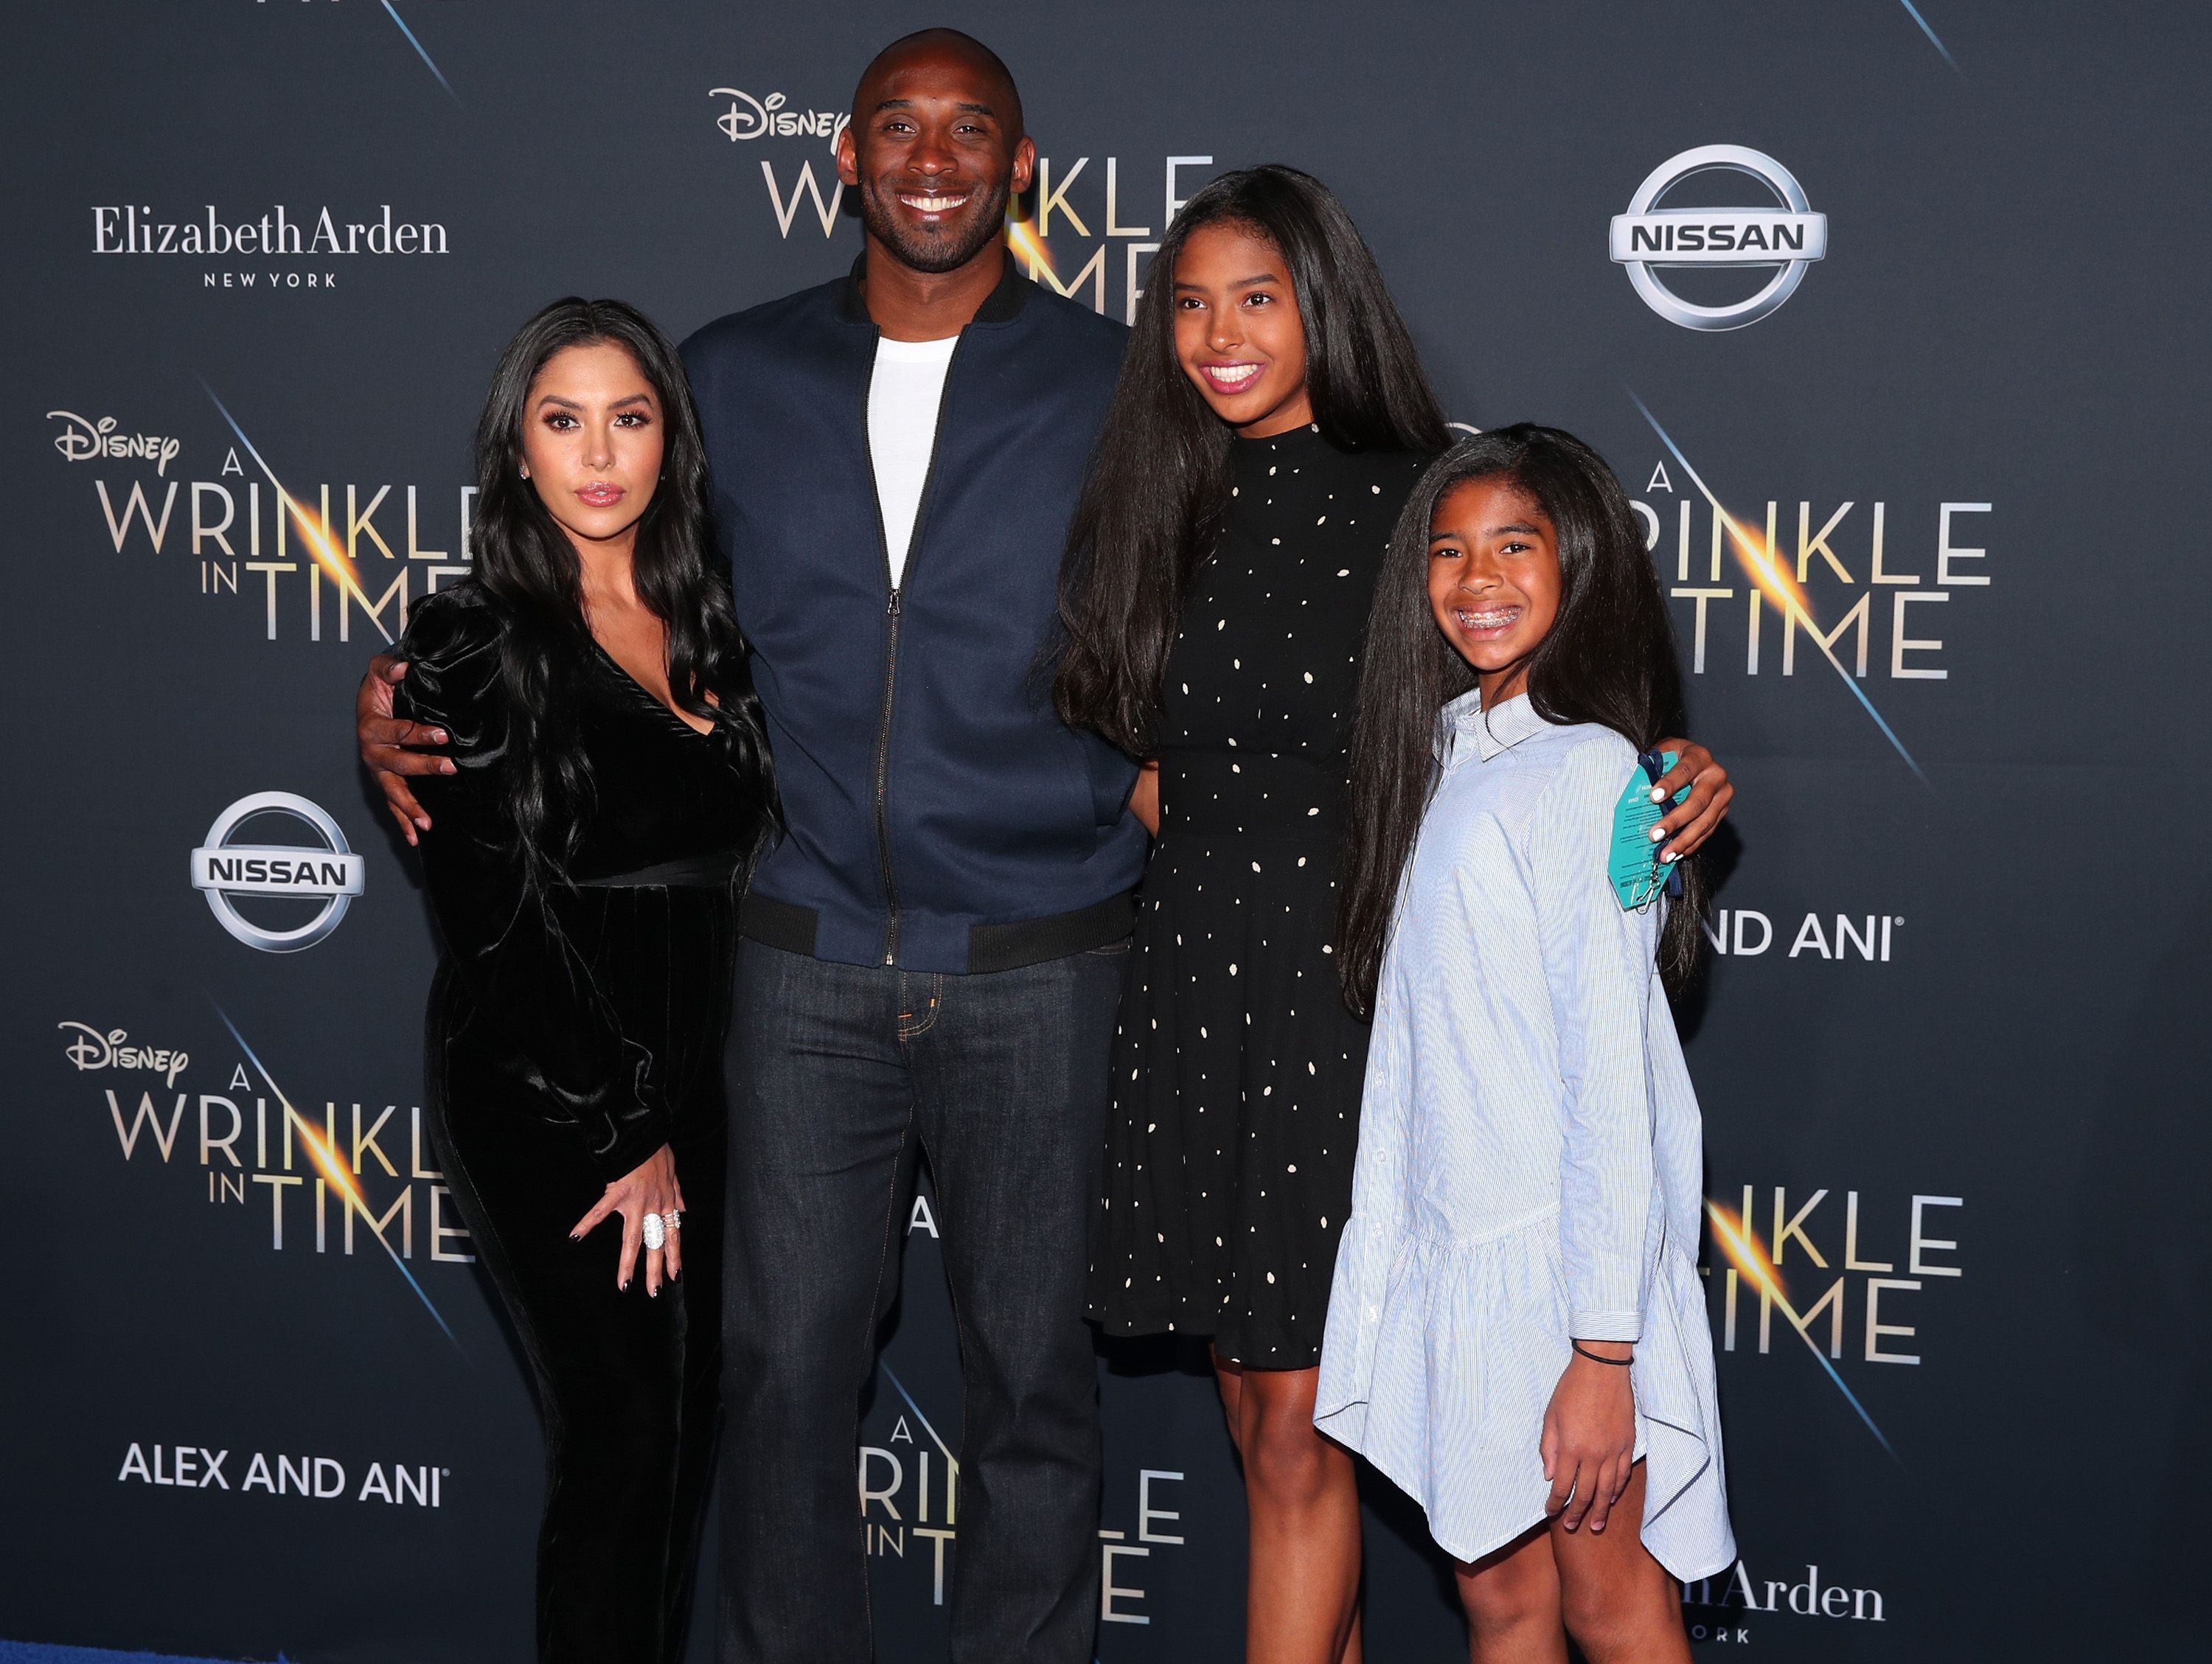 Vanessa and Kobe Bryant with daughters Natalia and Gianna at the premiere of "A Wrinkle In Time" in 2018, in Los Angeles | Source: Getty Images